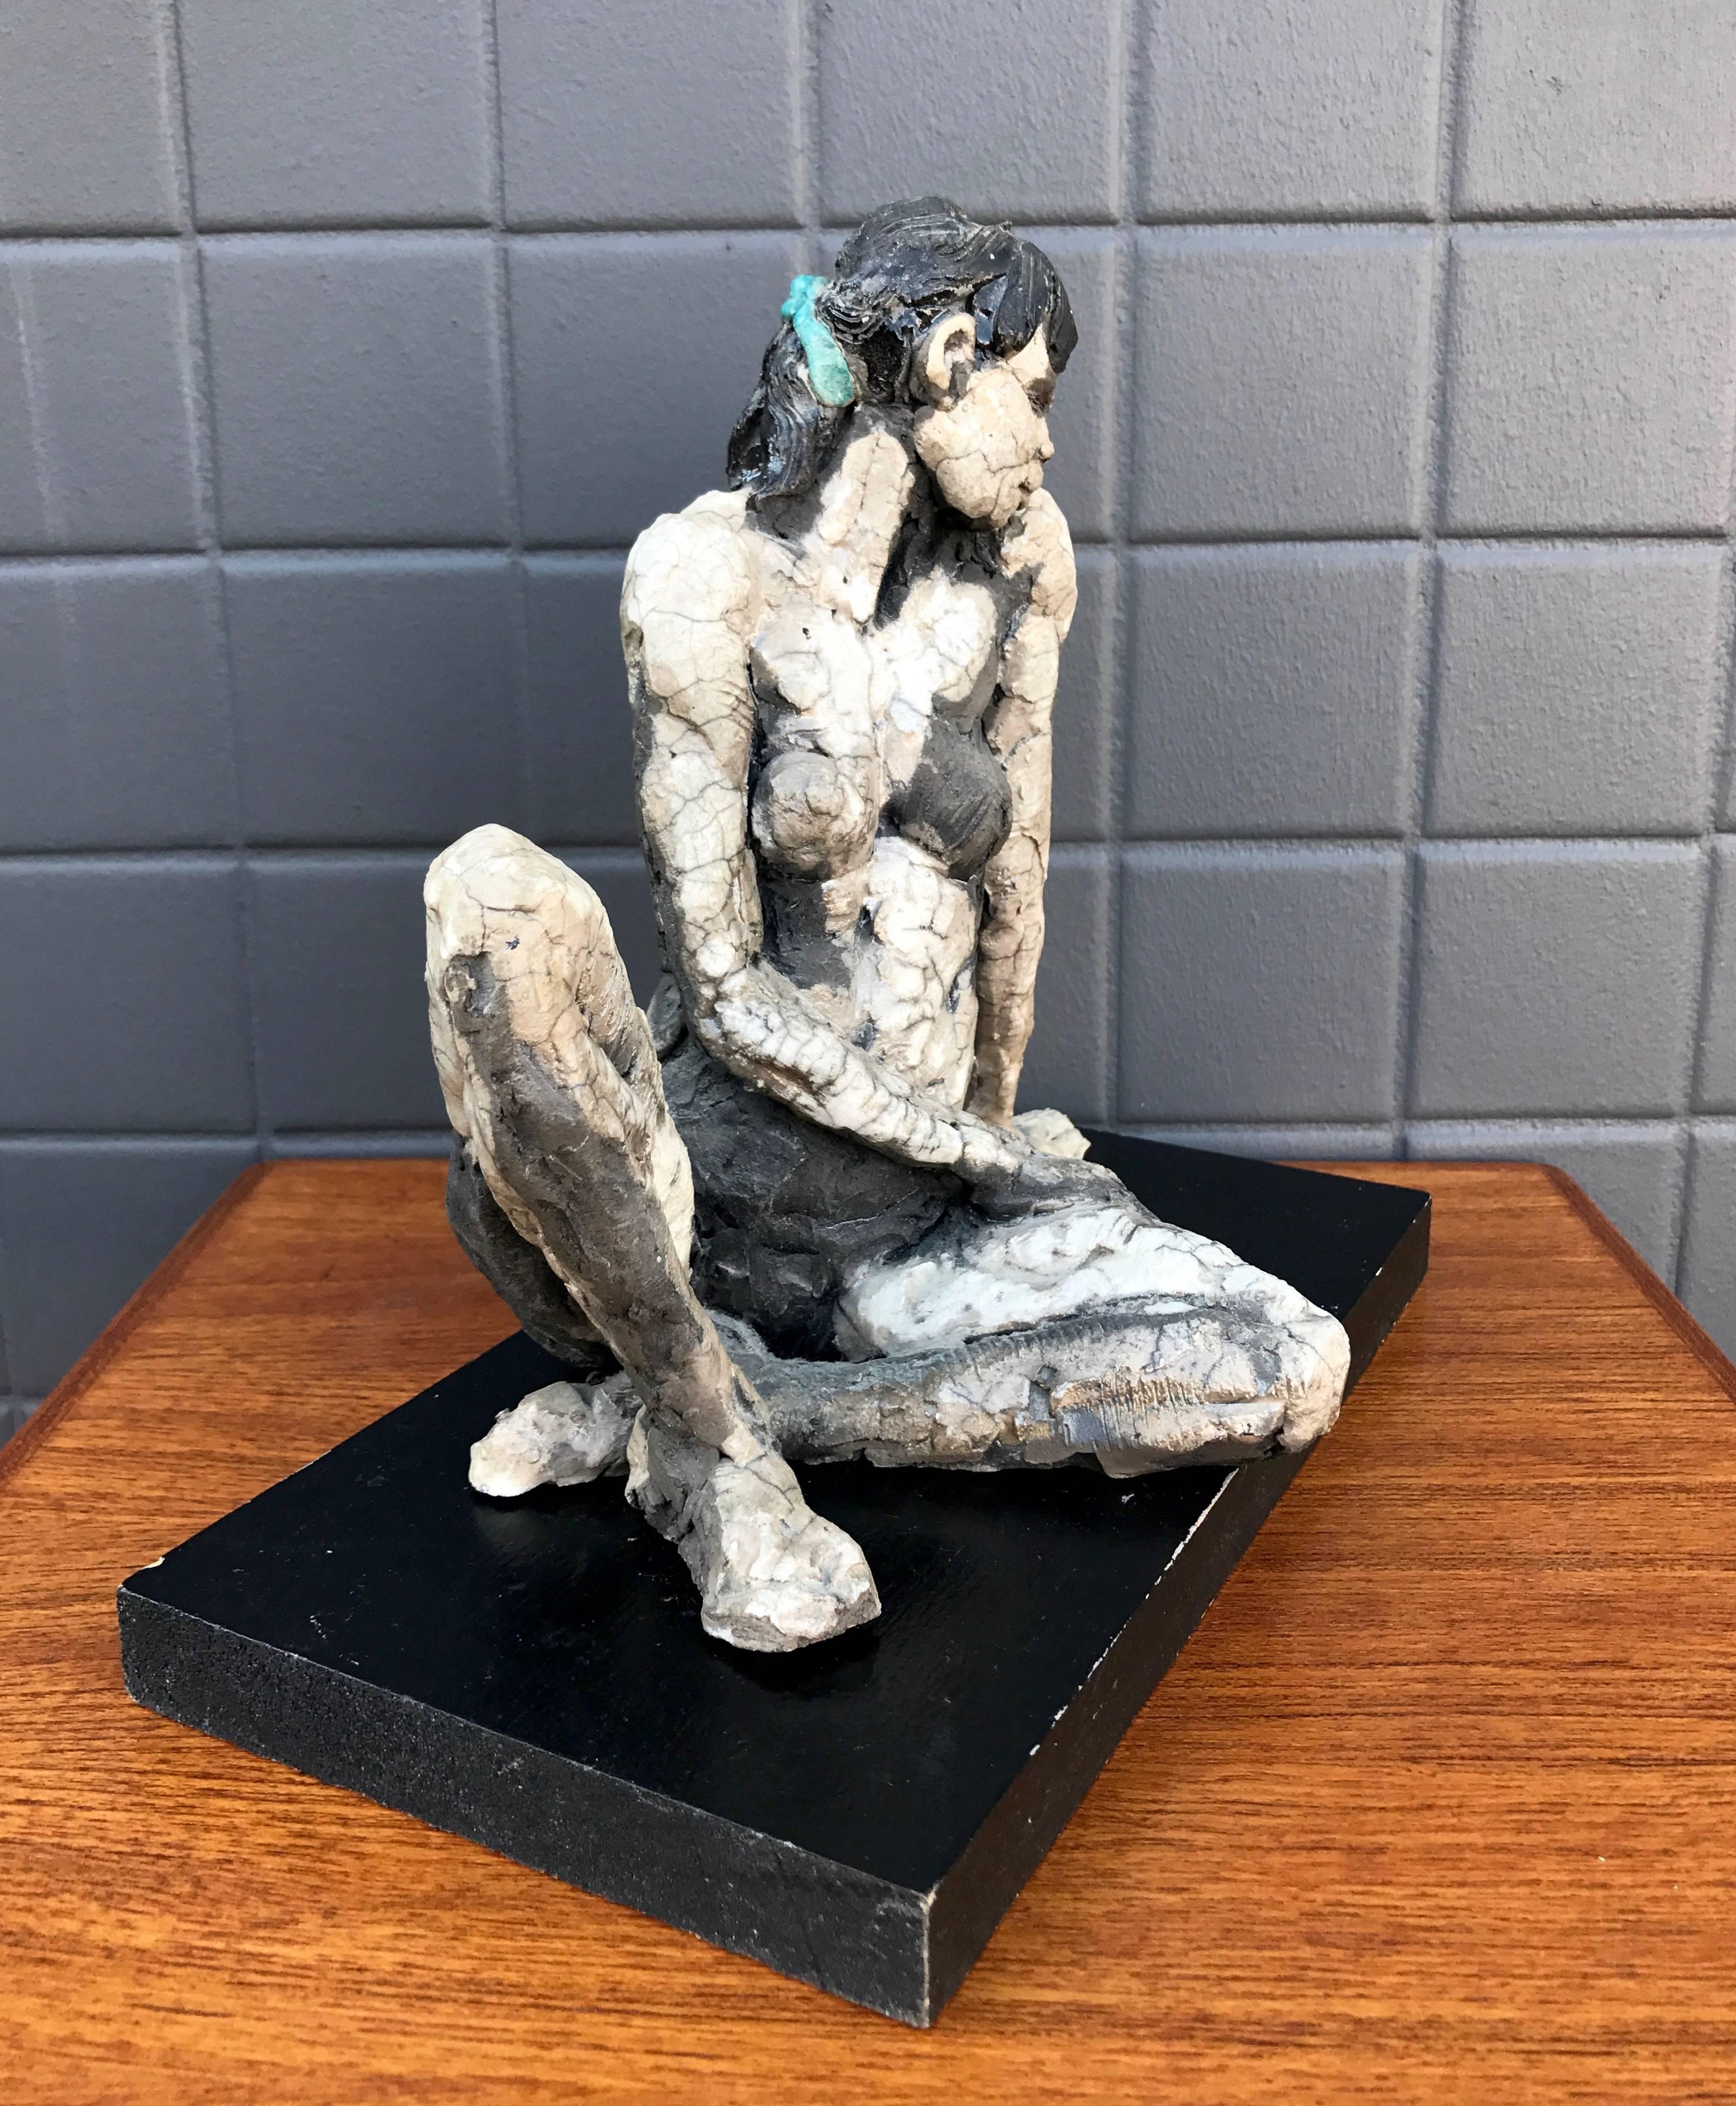 A raku fired ceramic sculpture of a reclining woman on original pedestal by California Bay Area artist Lana Federico.

Loosely sculpted piece features traditional glaze on hair and ribbon, with Japanese-style raku craquelure glaze contrasting with